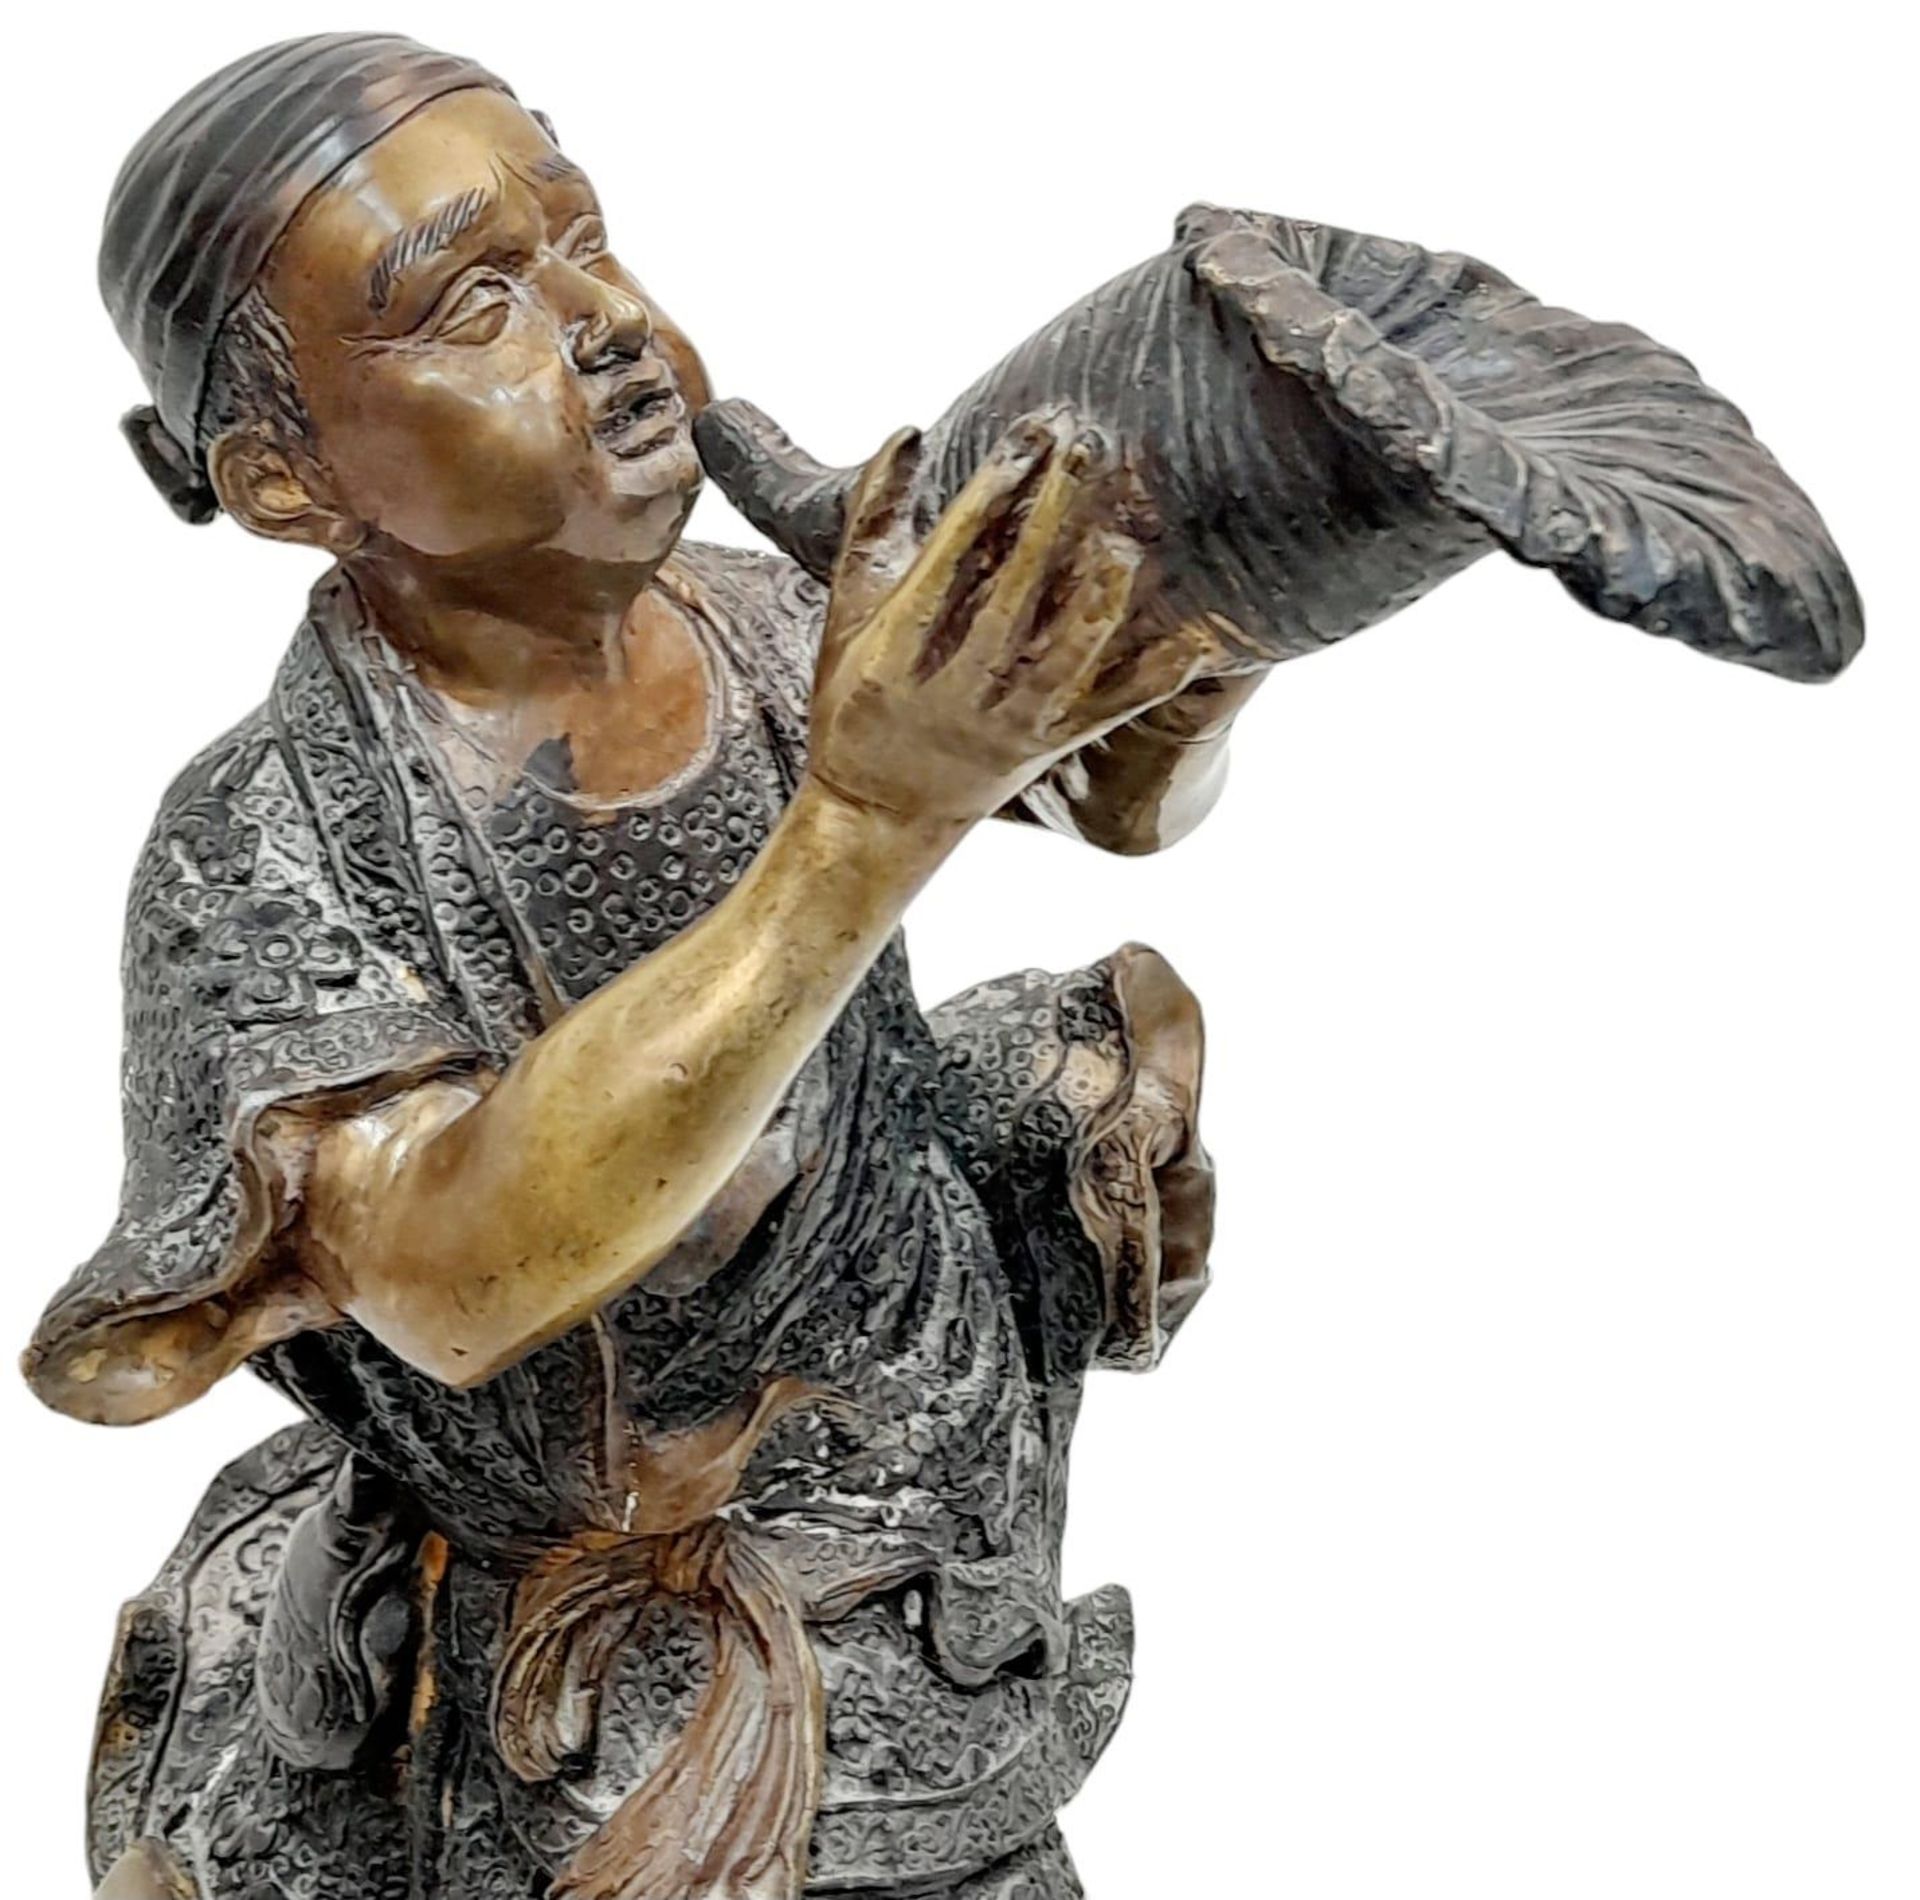 A Magnificent Large Antique Japanese Edo Period Okimono Bronze Statue Depicting a Young Man - Image 2 of 4